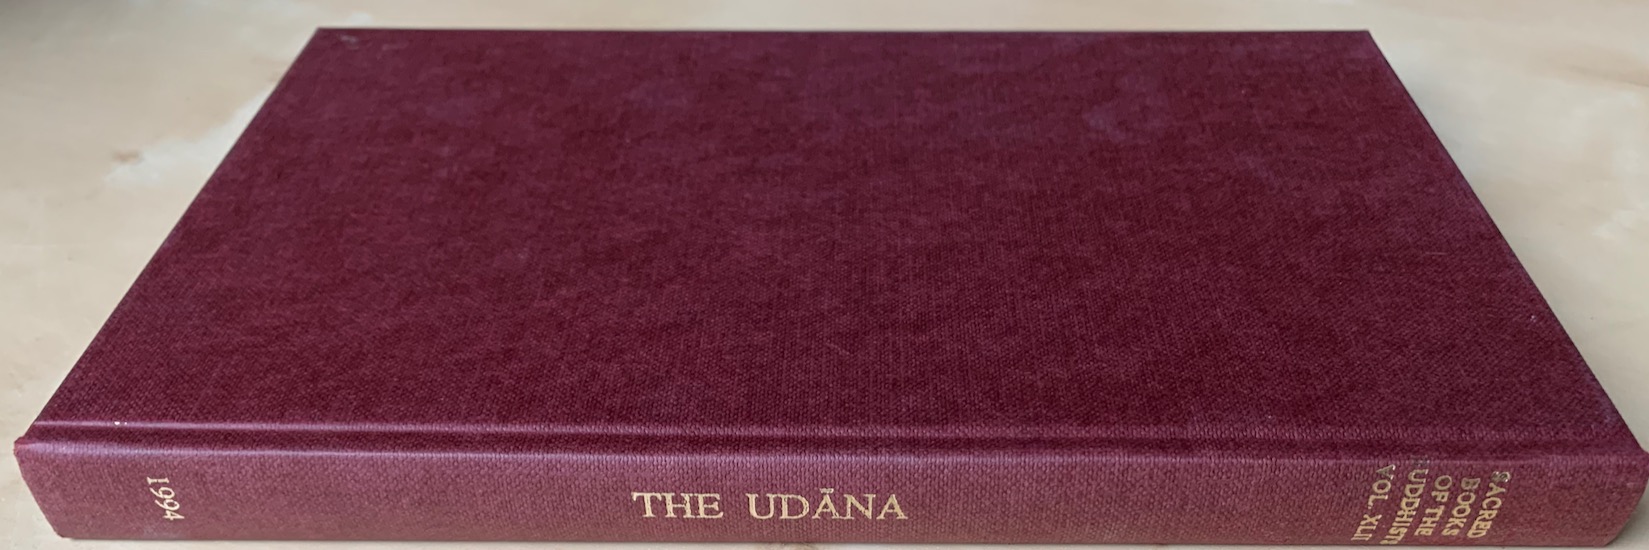 Masefield, Peter (tr.) - THE UDANA. Sacred Books of the Buddhists vol. XLII